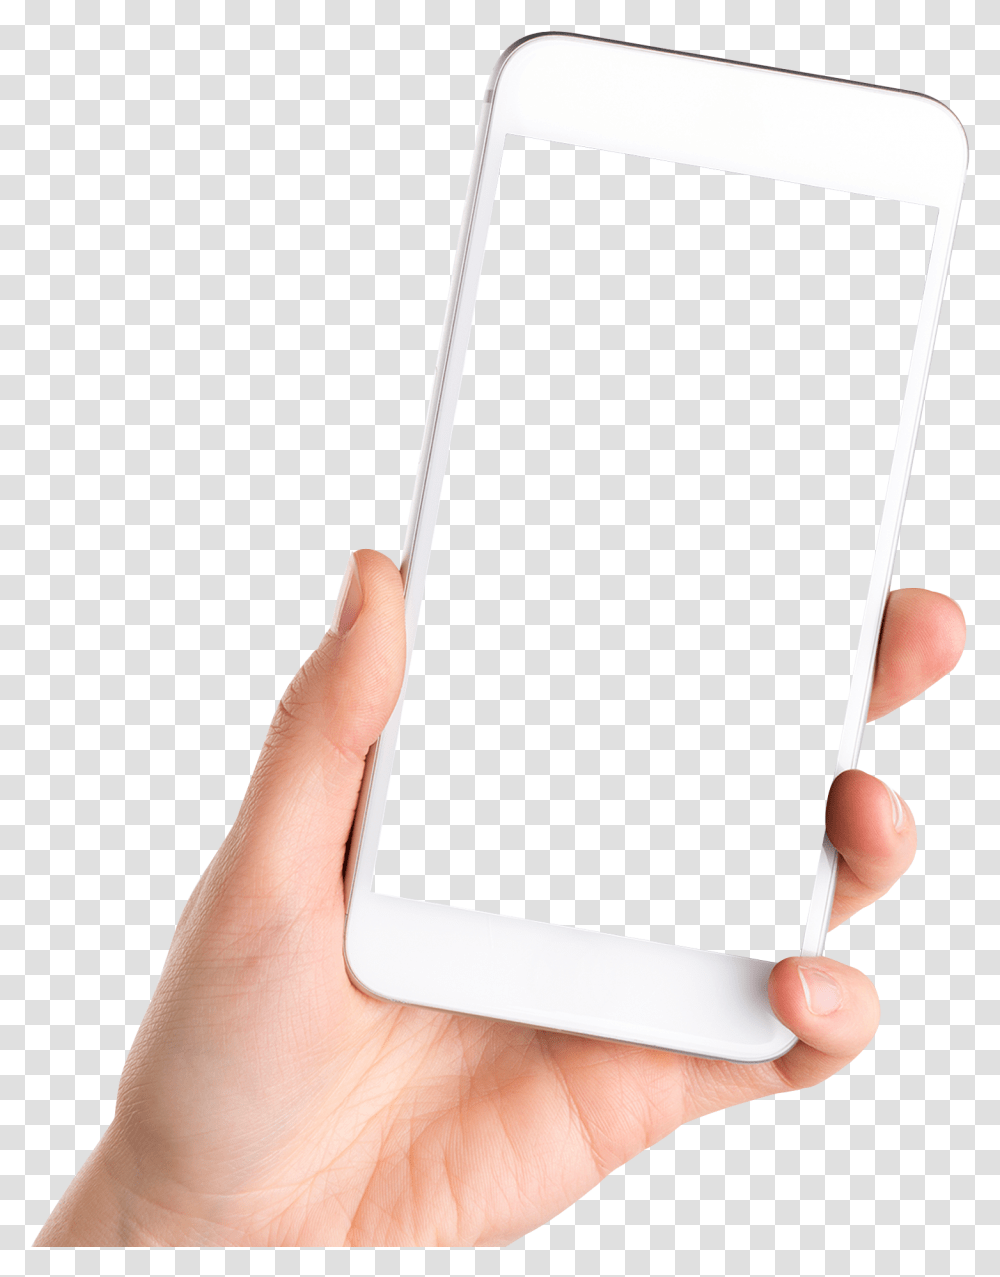 Phone In Hand Image Hand Holding Phone, Person, Human, Electronics, Mobile Phone Transparent Png